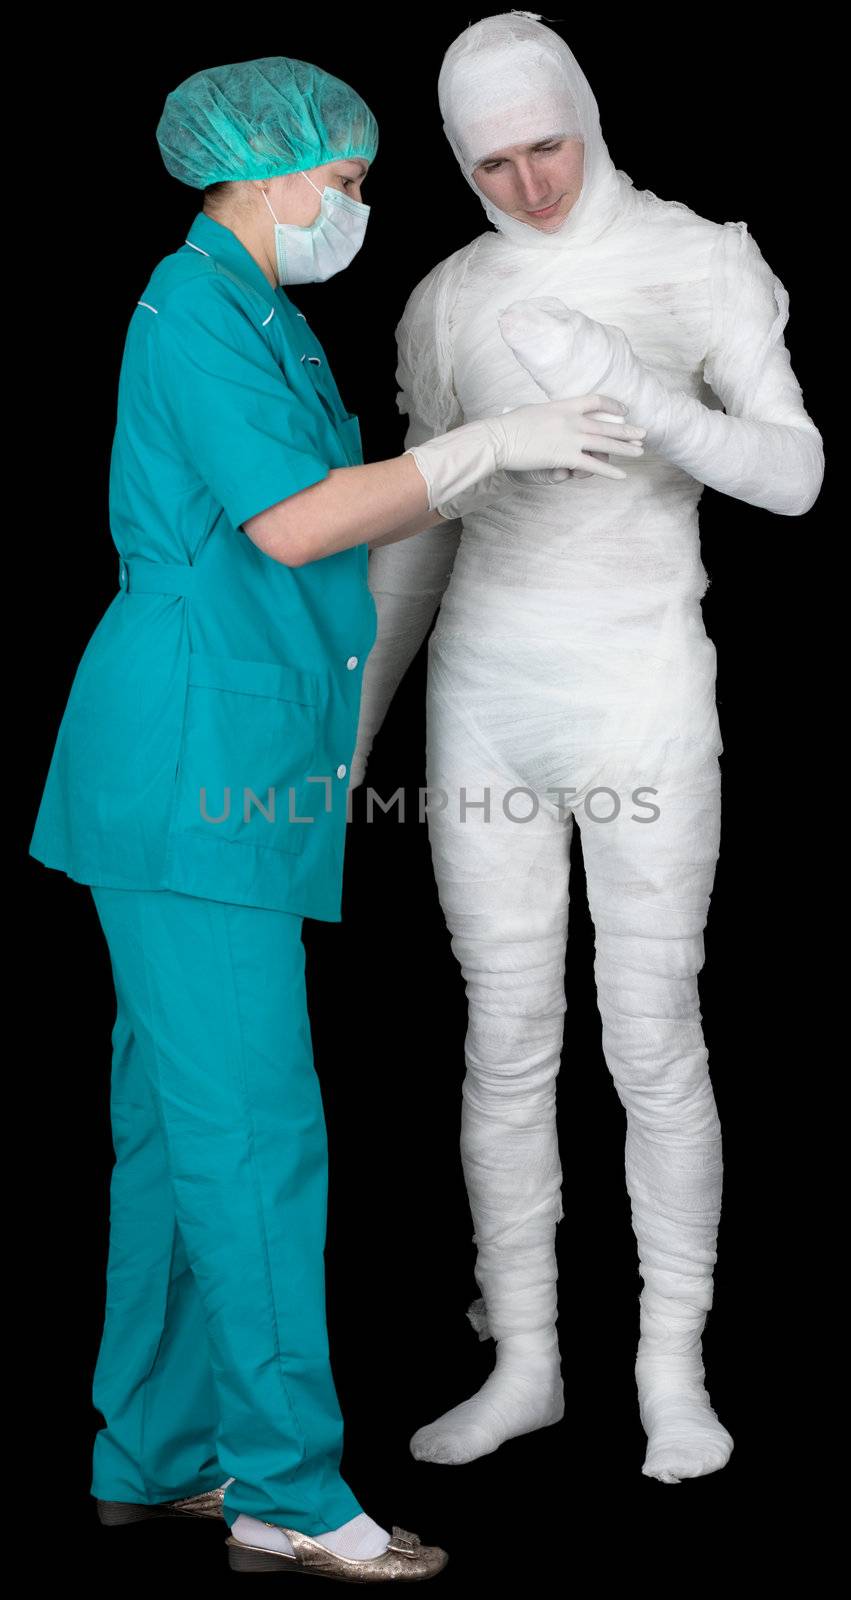 Man in bandage and nurse by pzaxe